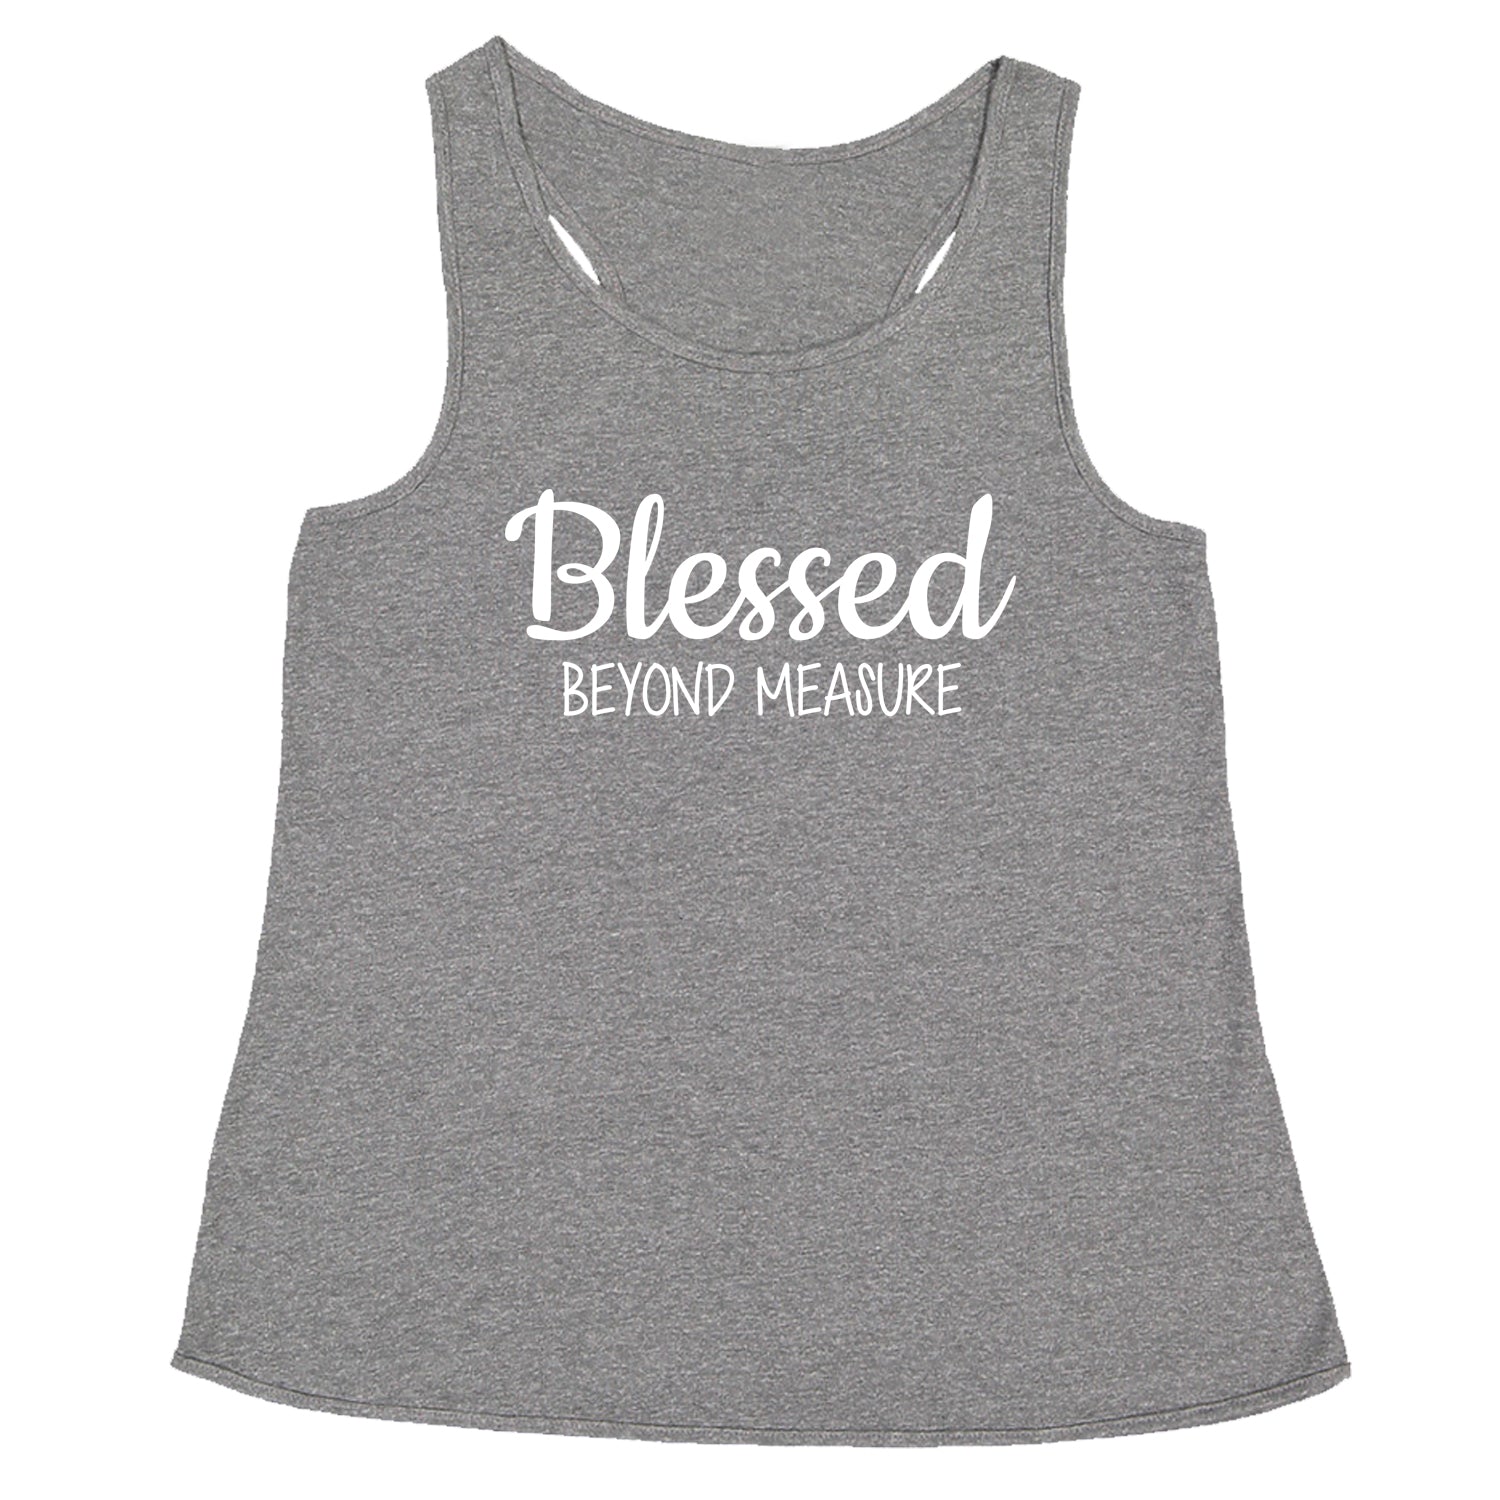 Blessed Beyond Measure Racerback Tank Top for Women blessed, face, look by Expression Tees